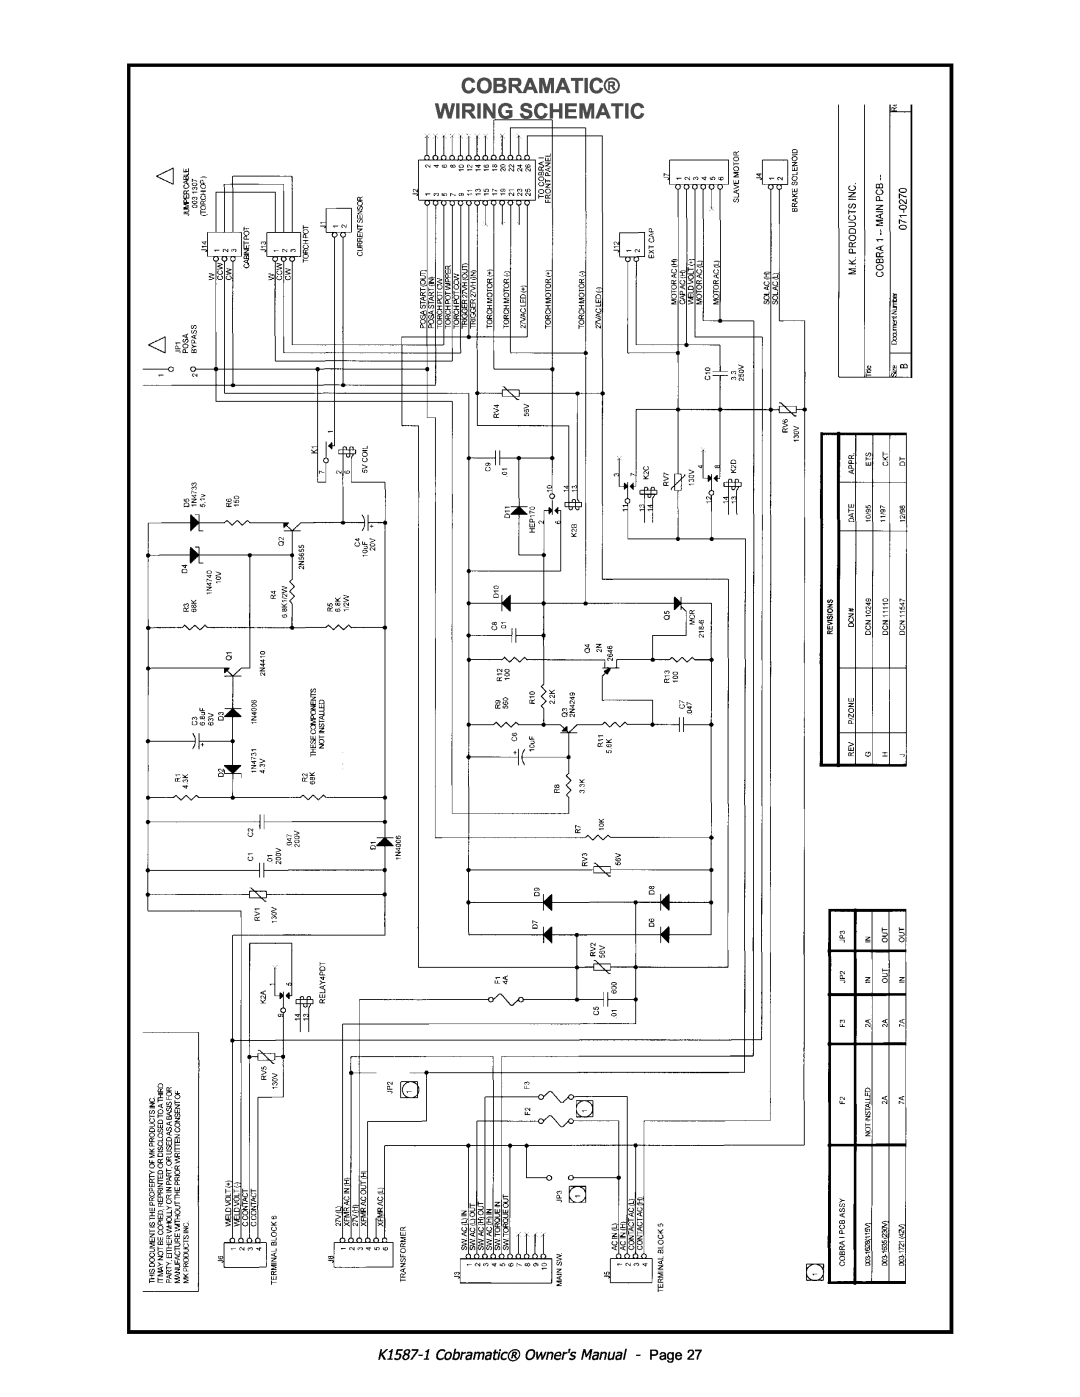 Lincoln Electric IM597 manual Cobramatic Wiring Schematic 